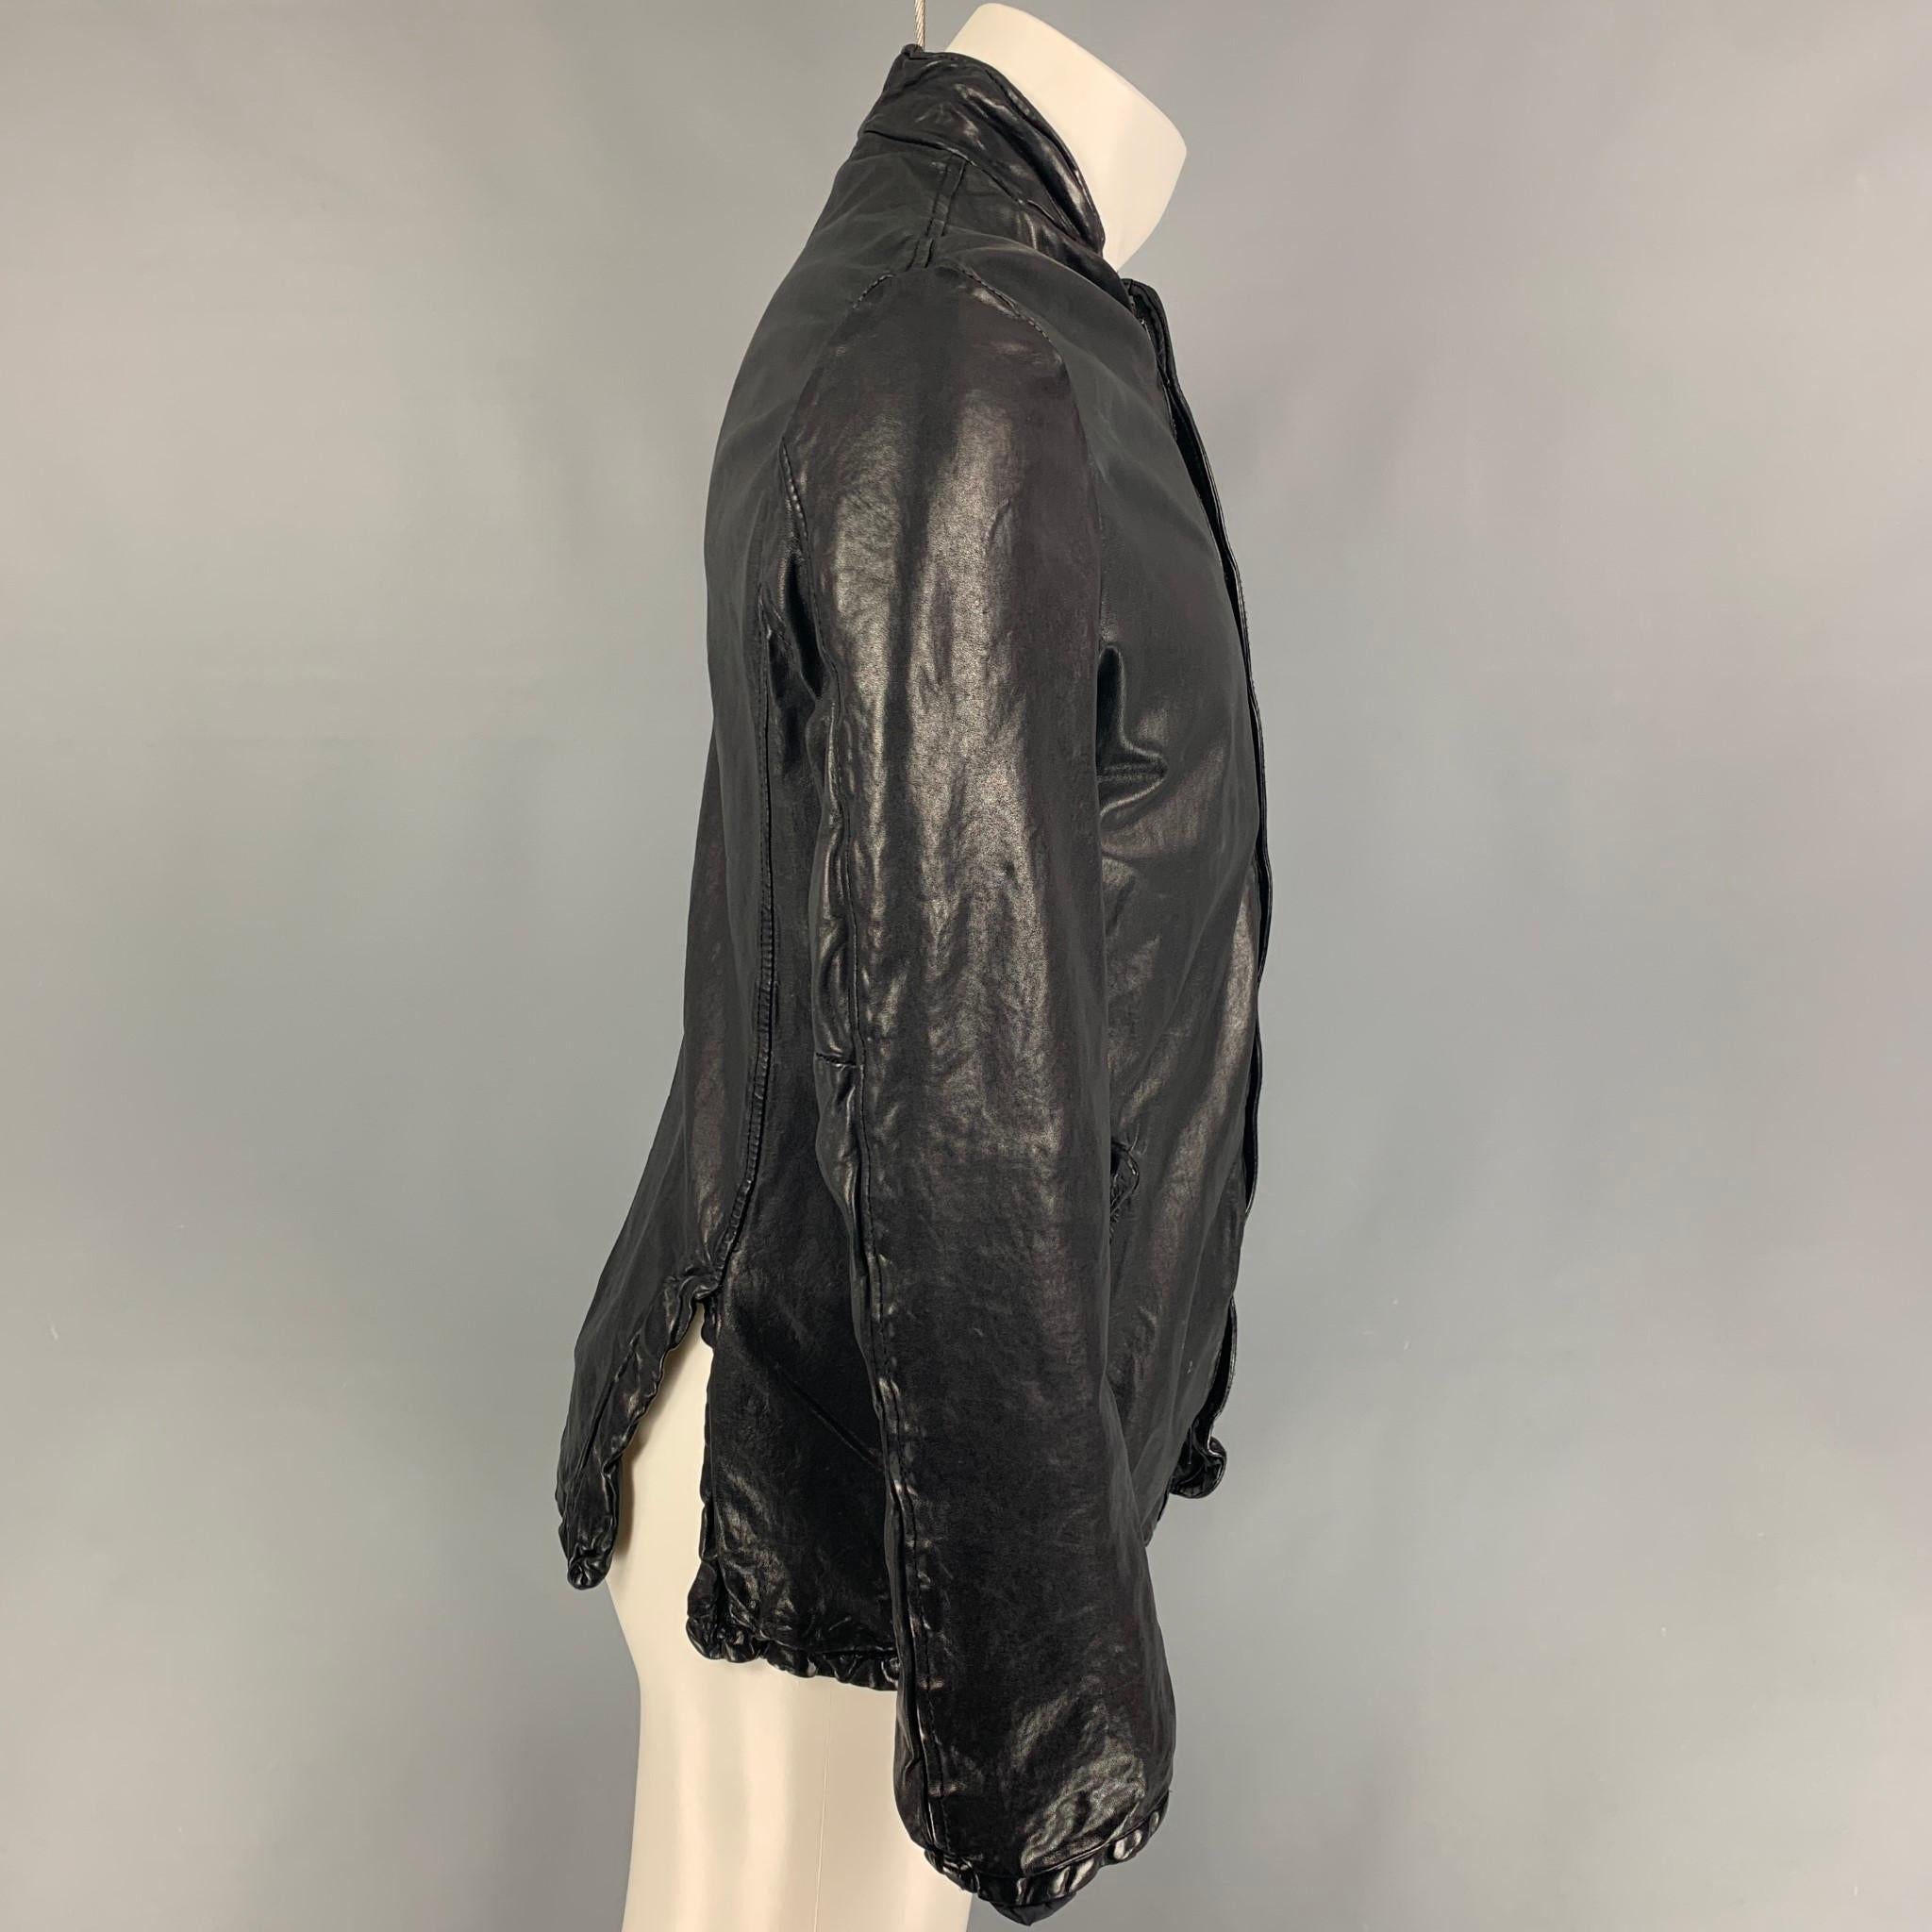 GIORGIO BRATO jacket comes in a black leather featuring a stand up collar, front pockets, and a hidden zip up closure. Made in Italy.

Very Good Pre-Owned Condition.
Marked: 52

Measurements:

Shoulder: 18 in.
Chest: 40 in.
Sleeve: 25 in.
Length: 26